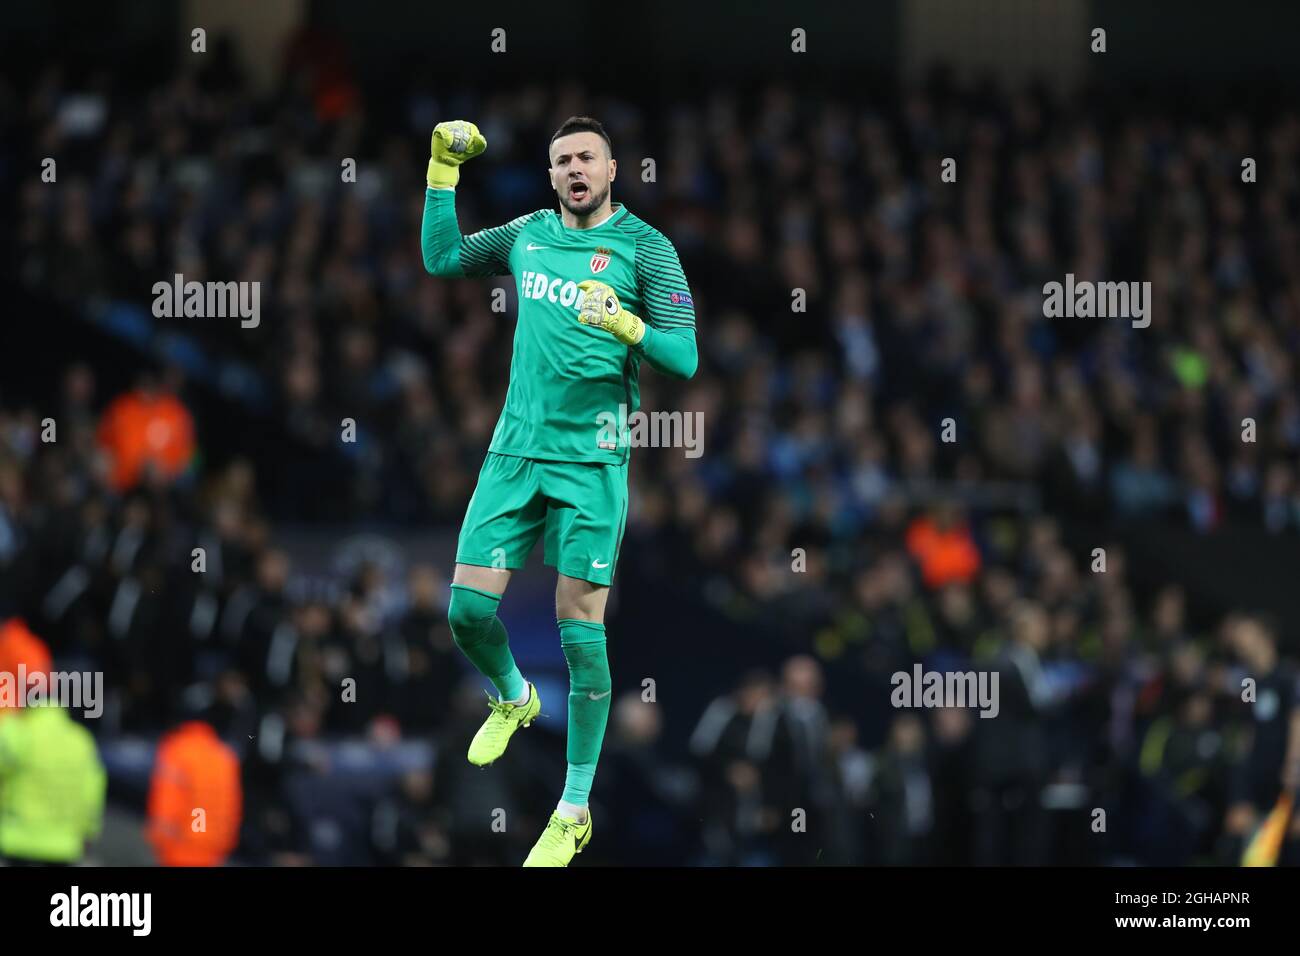 Danijel Subasic of Monaco celebrates during the Champions League Round of 16 match at Etihad Stadium, Manchester. Picture date: February 21st 2017. Pic credit should read: Lynne Cameron/Sportimage via PA Images Stock Photo